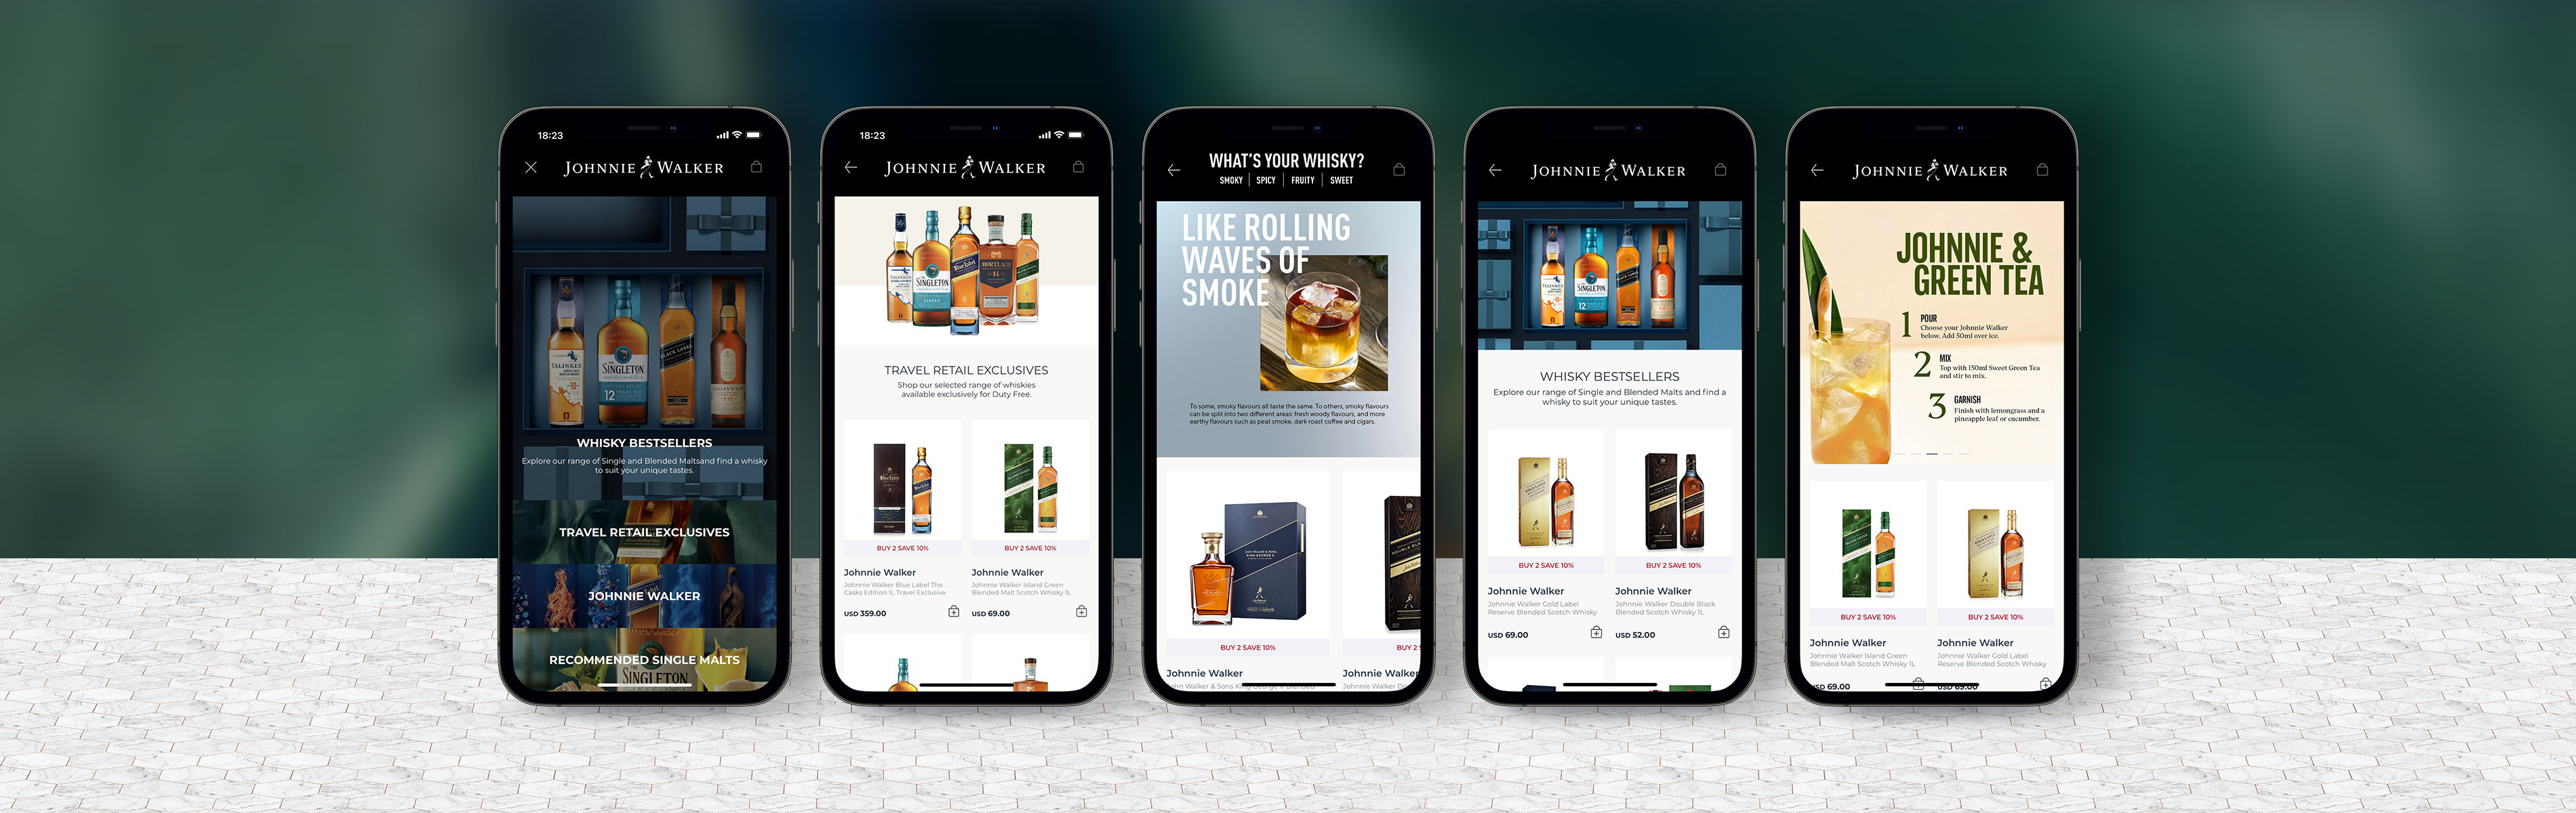 Inflyter launches first fully branded mobile commerce boutique  with Diageo and DFS